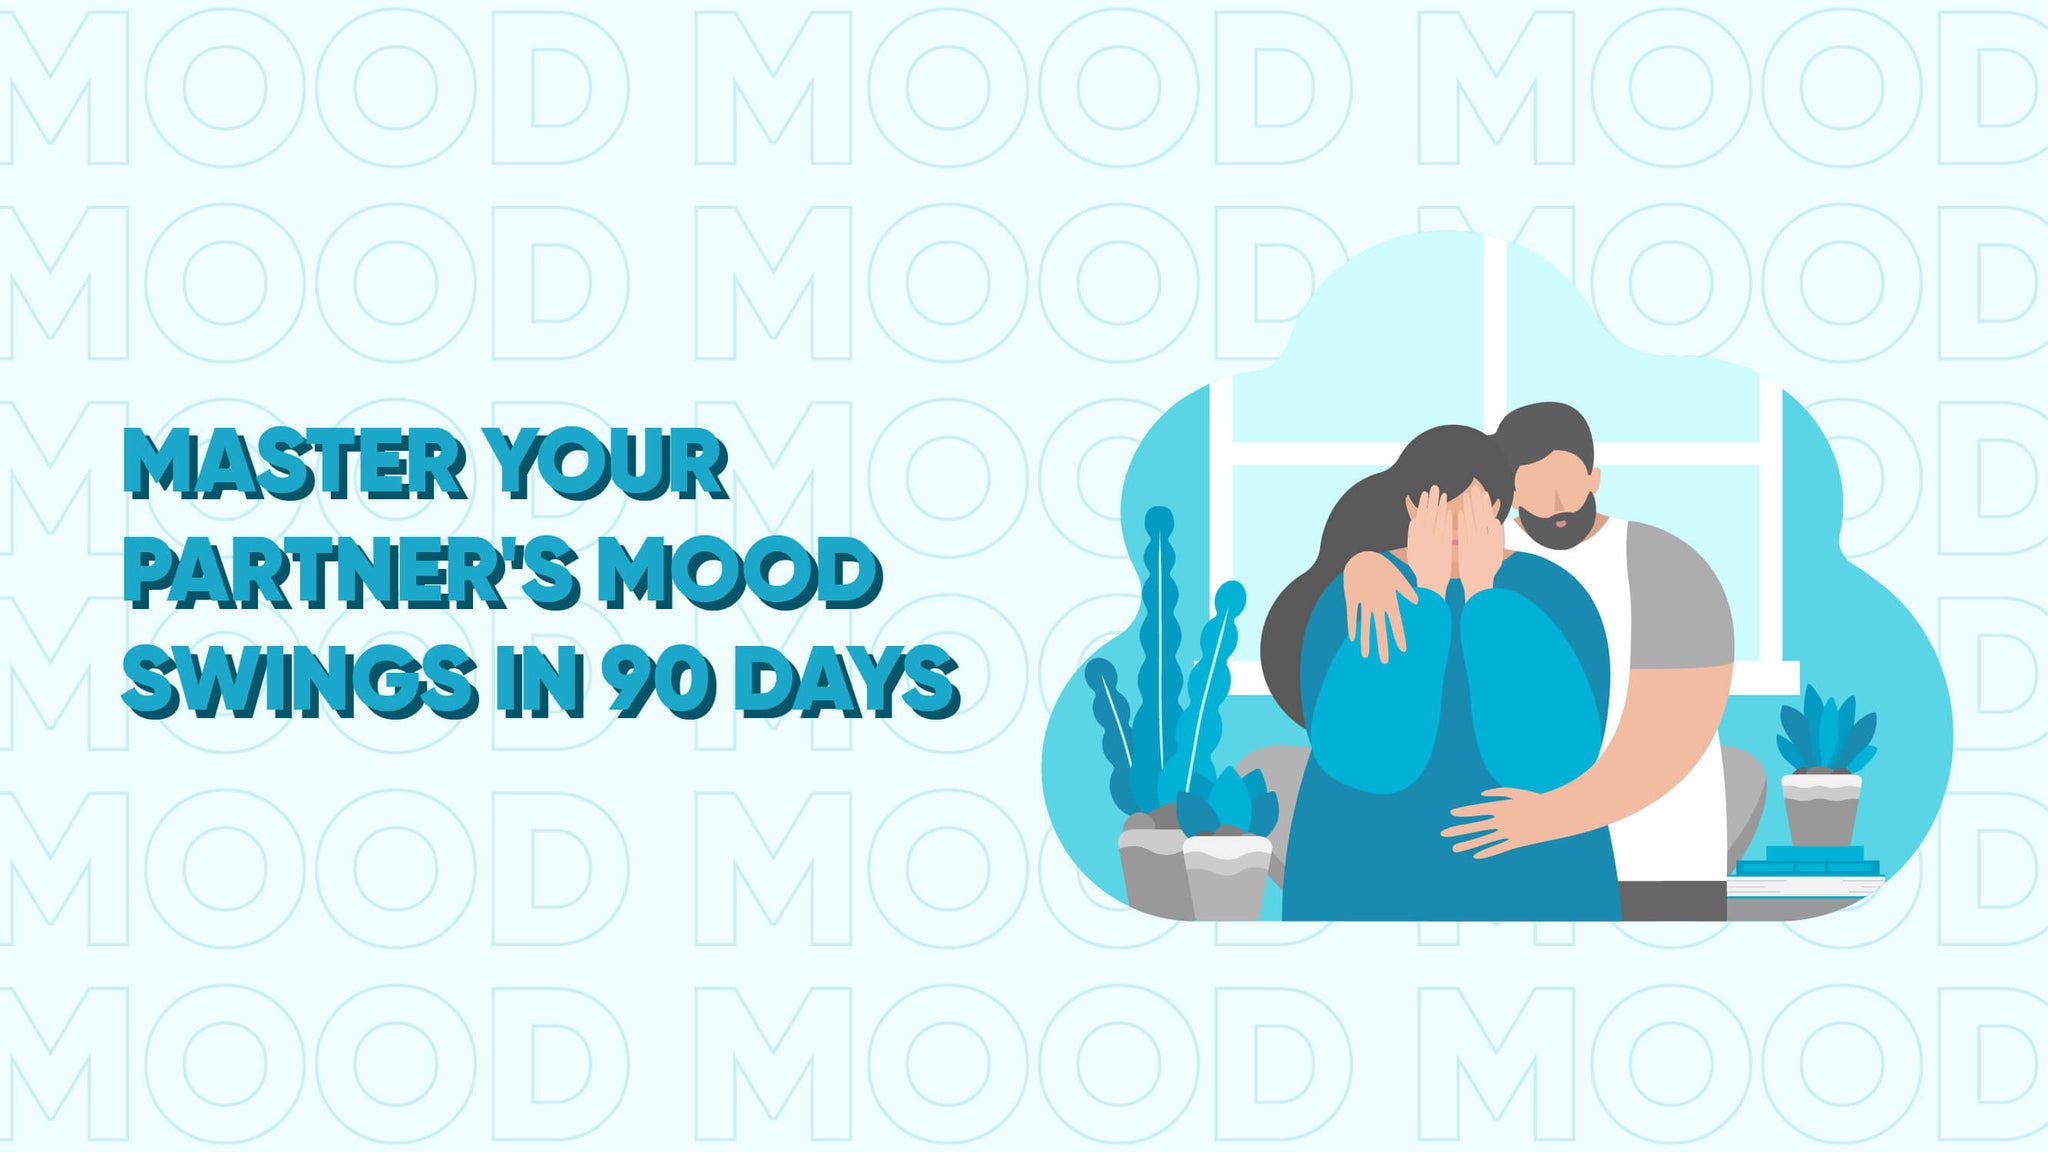 Master your partner's mood swings in 90 days